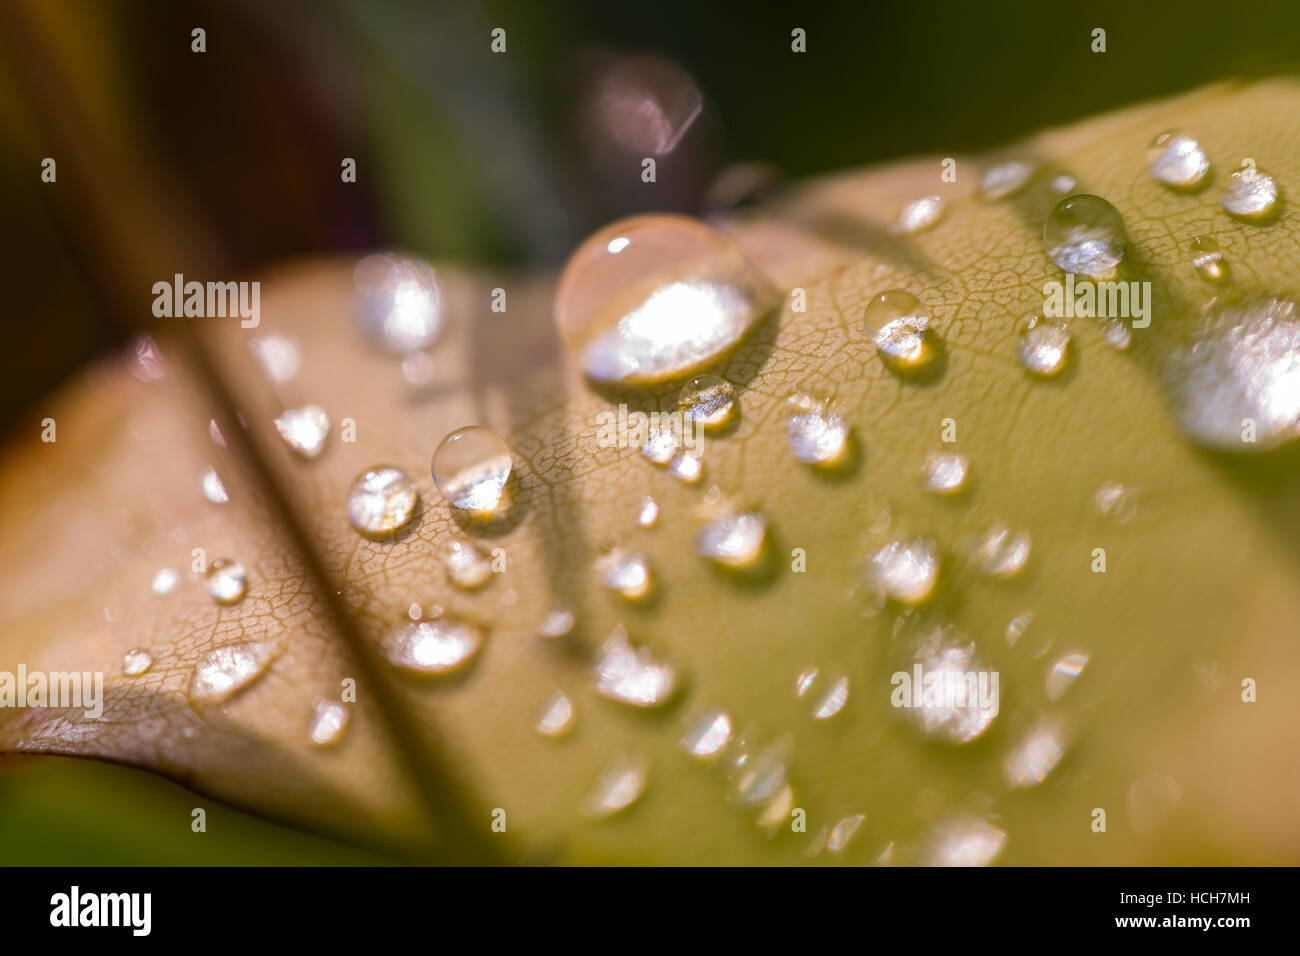 Water drops on a leaf showing refracted light and vein patterns Stock Photo